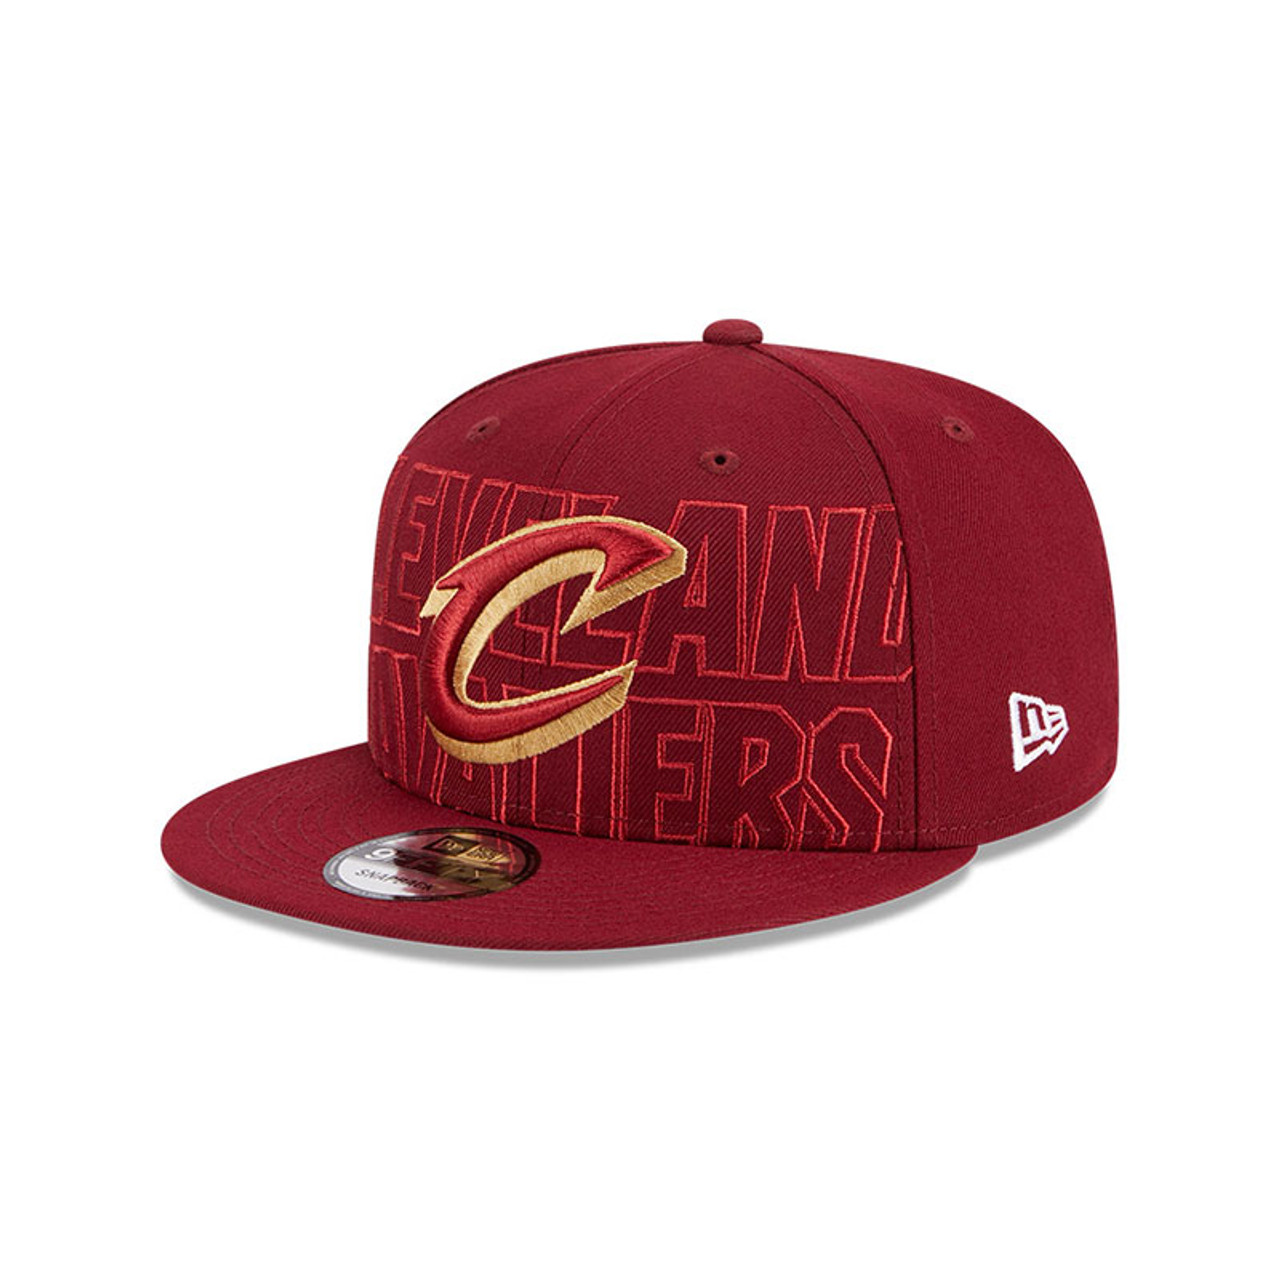 Official Cleveland Cavaliers Hats, Snapbacks, Fitted Hats, Beanies